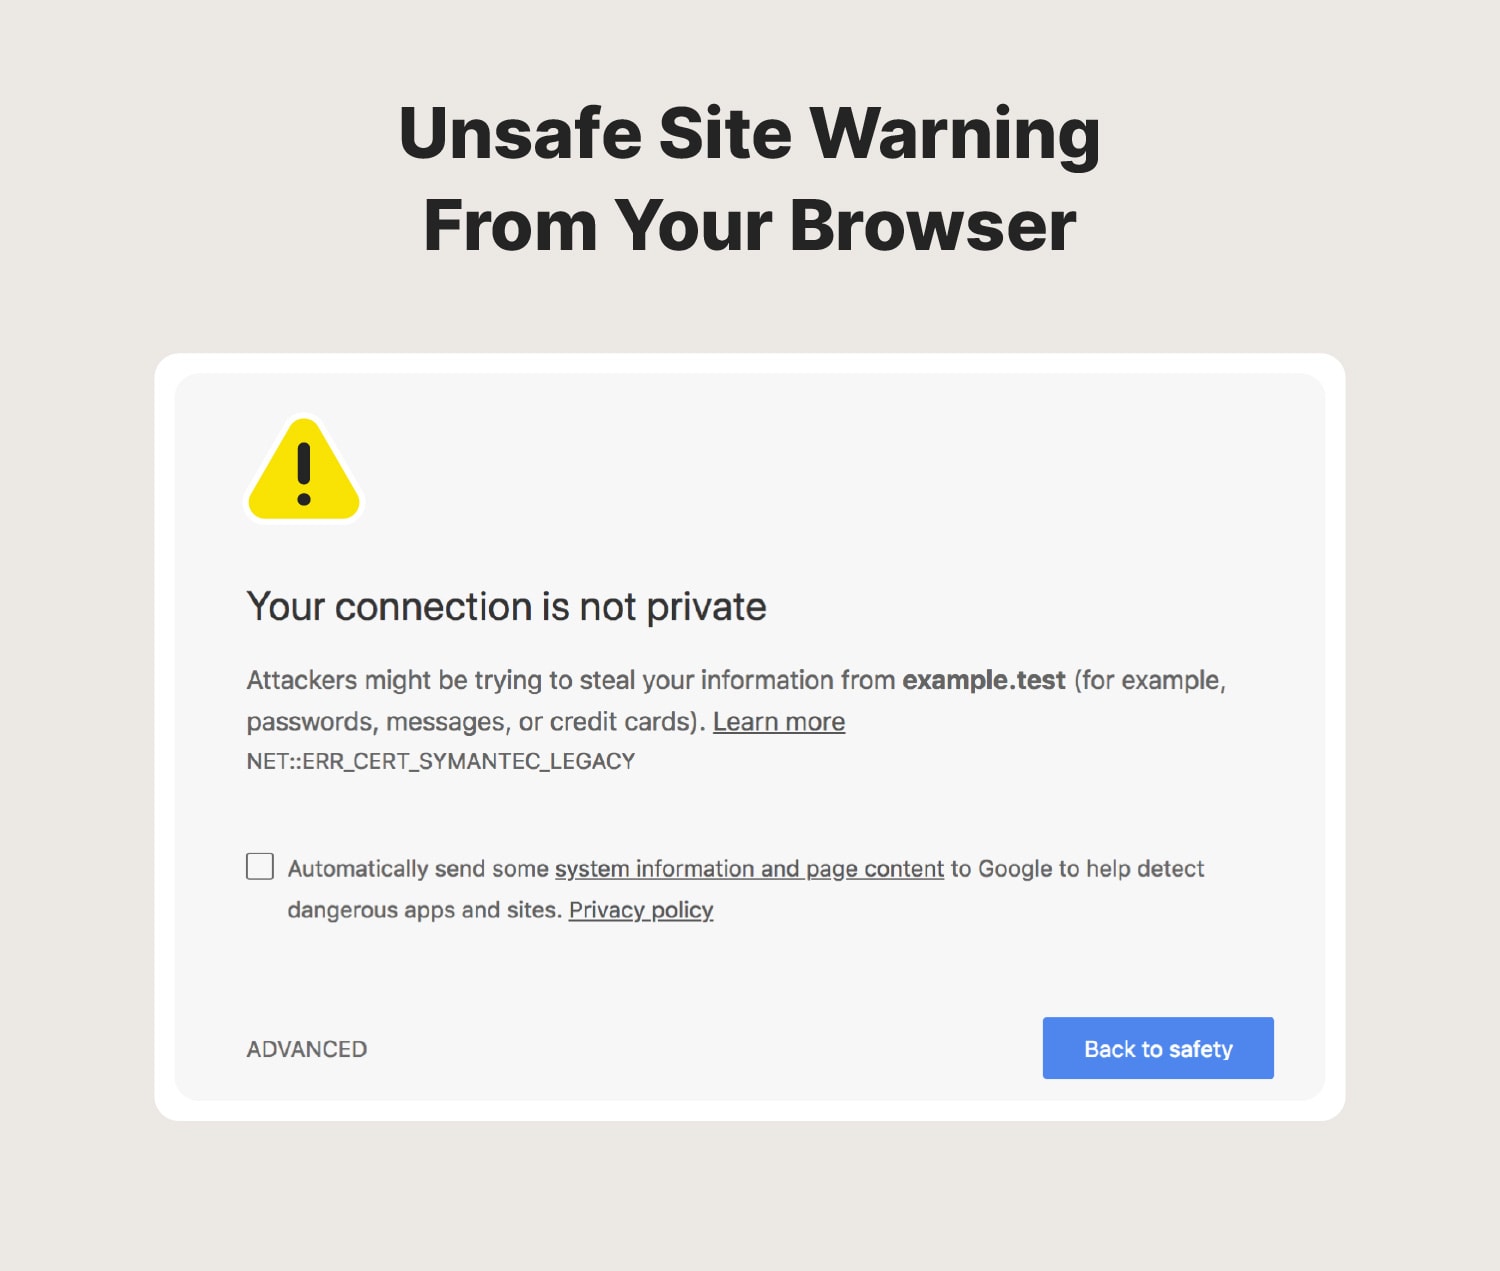 Image of a browser warning that says a user’s connection is not private.